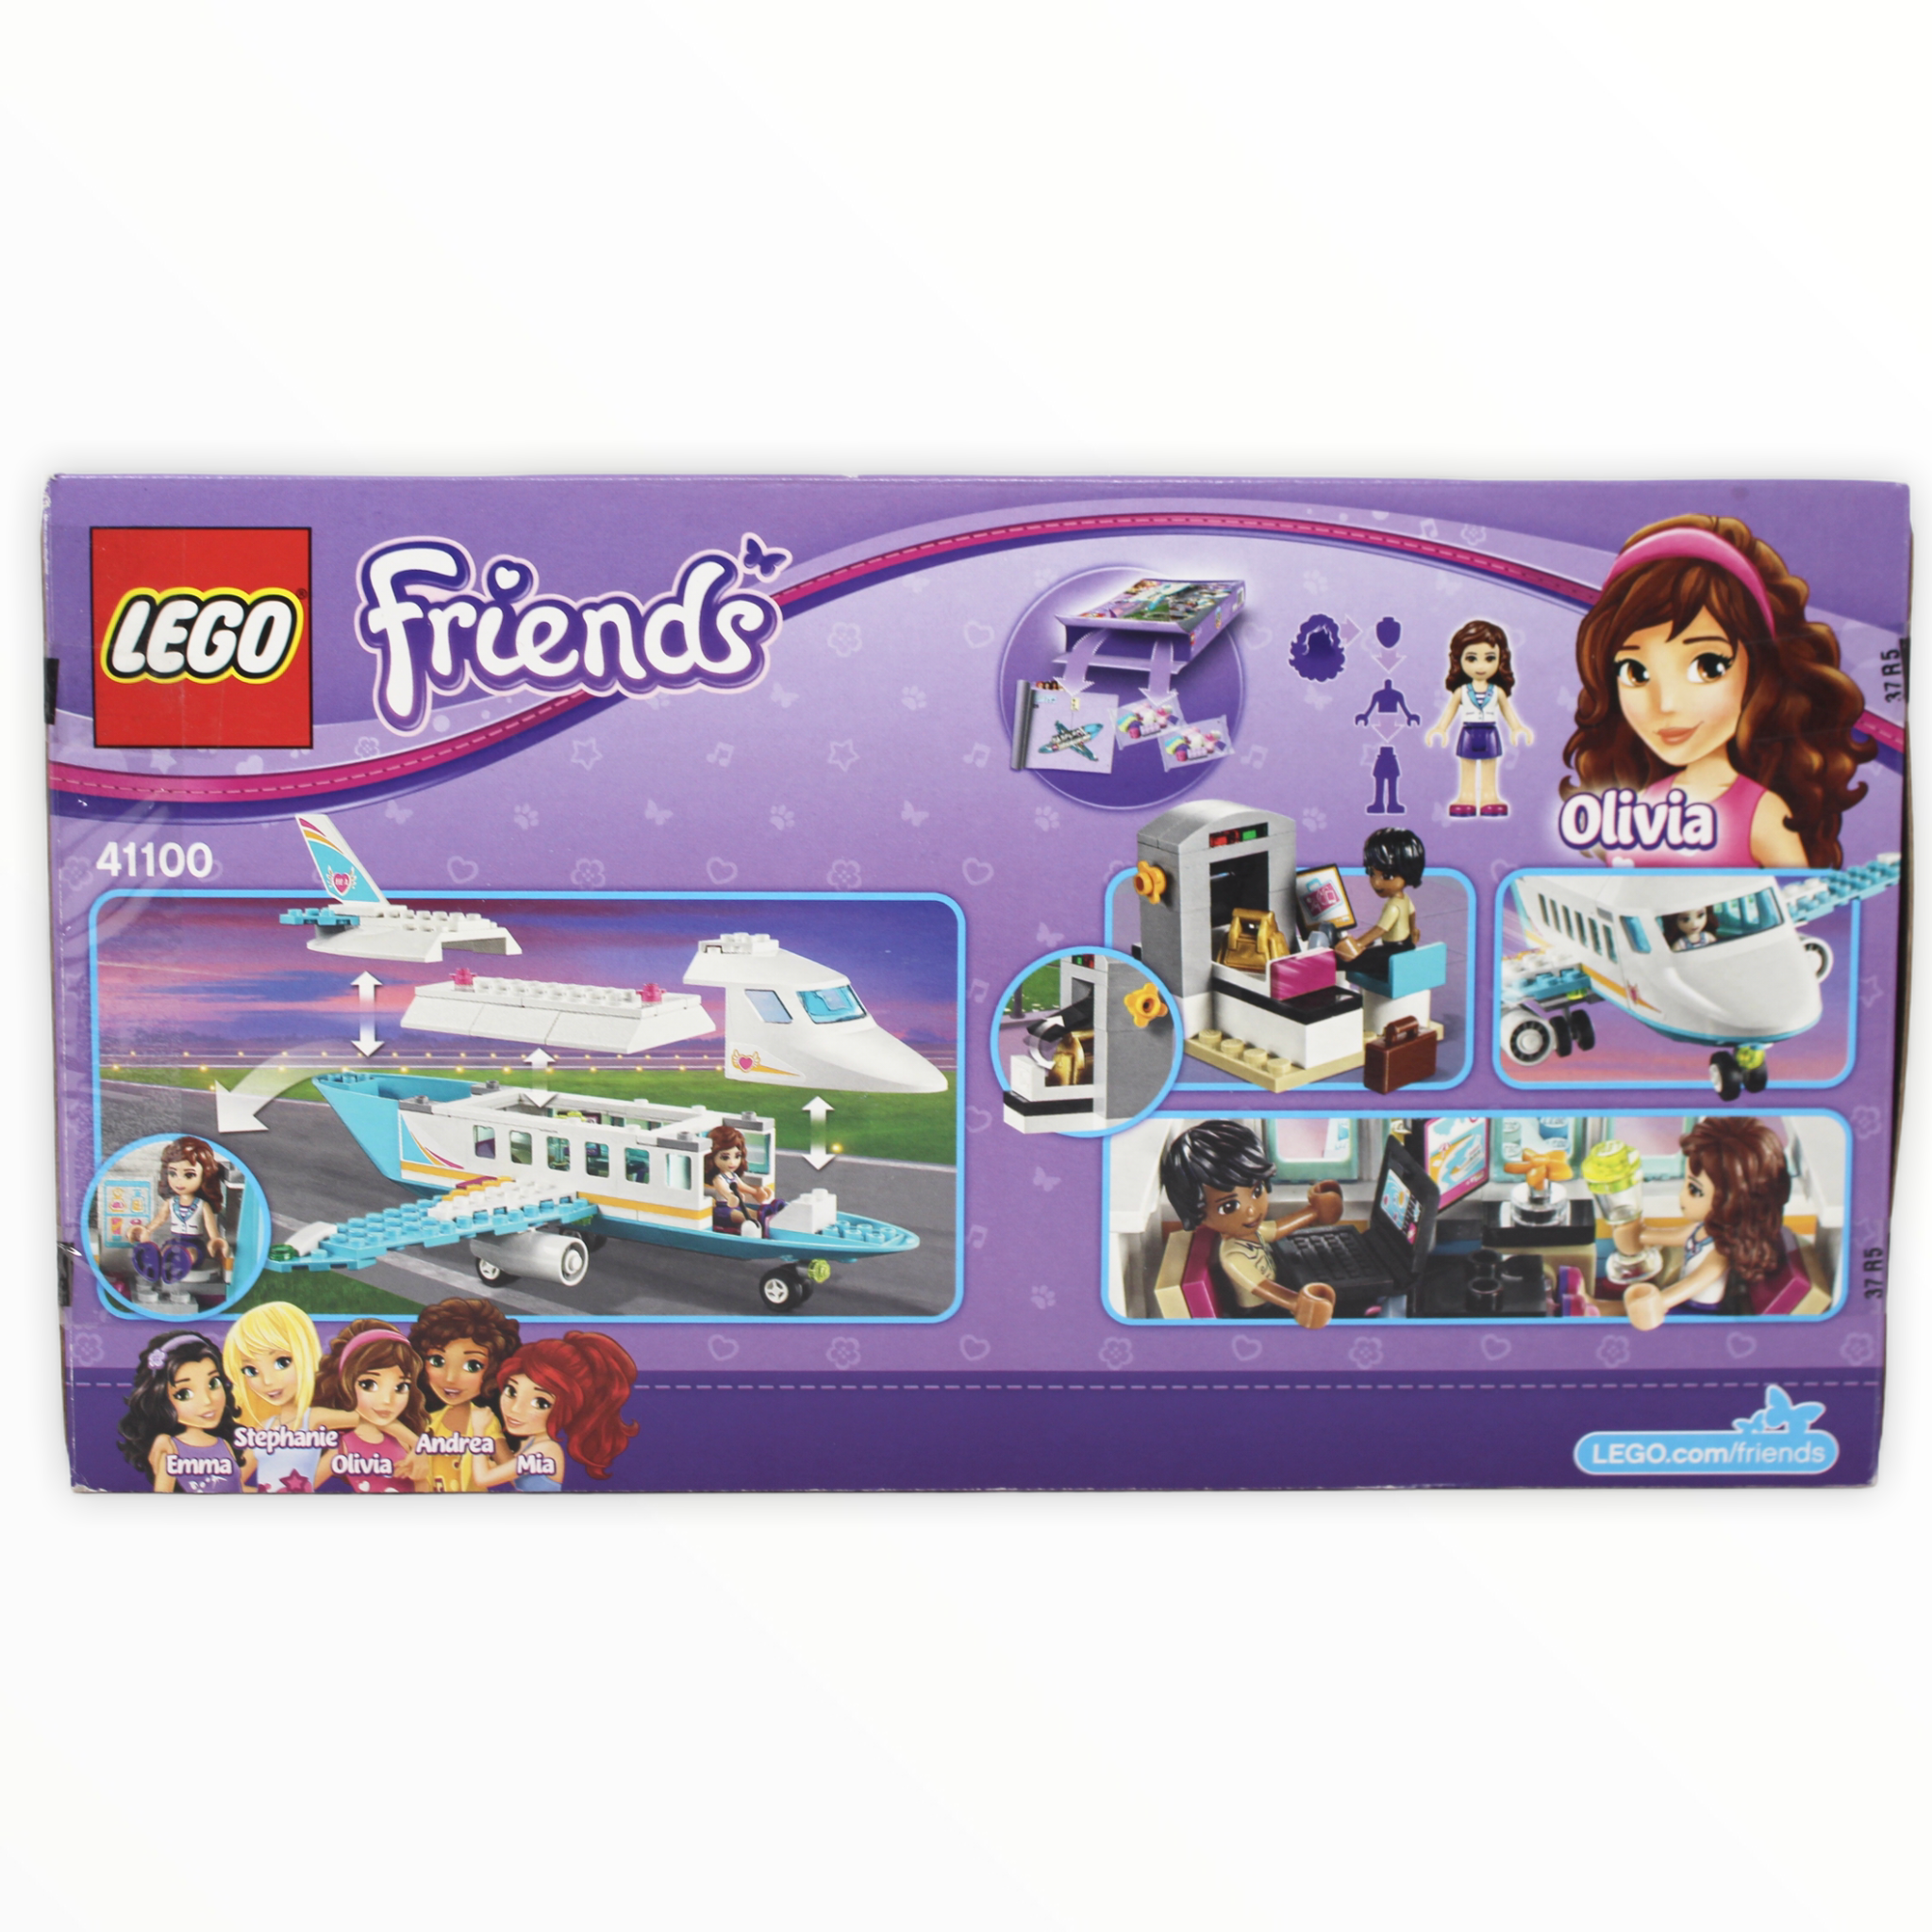 Certified Used Set 41100 Friends Heartlake Private Jet